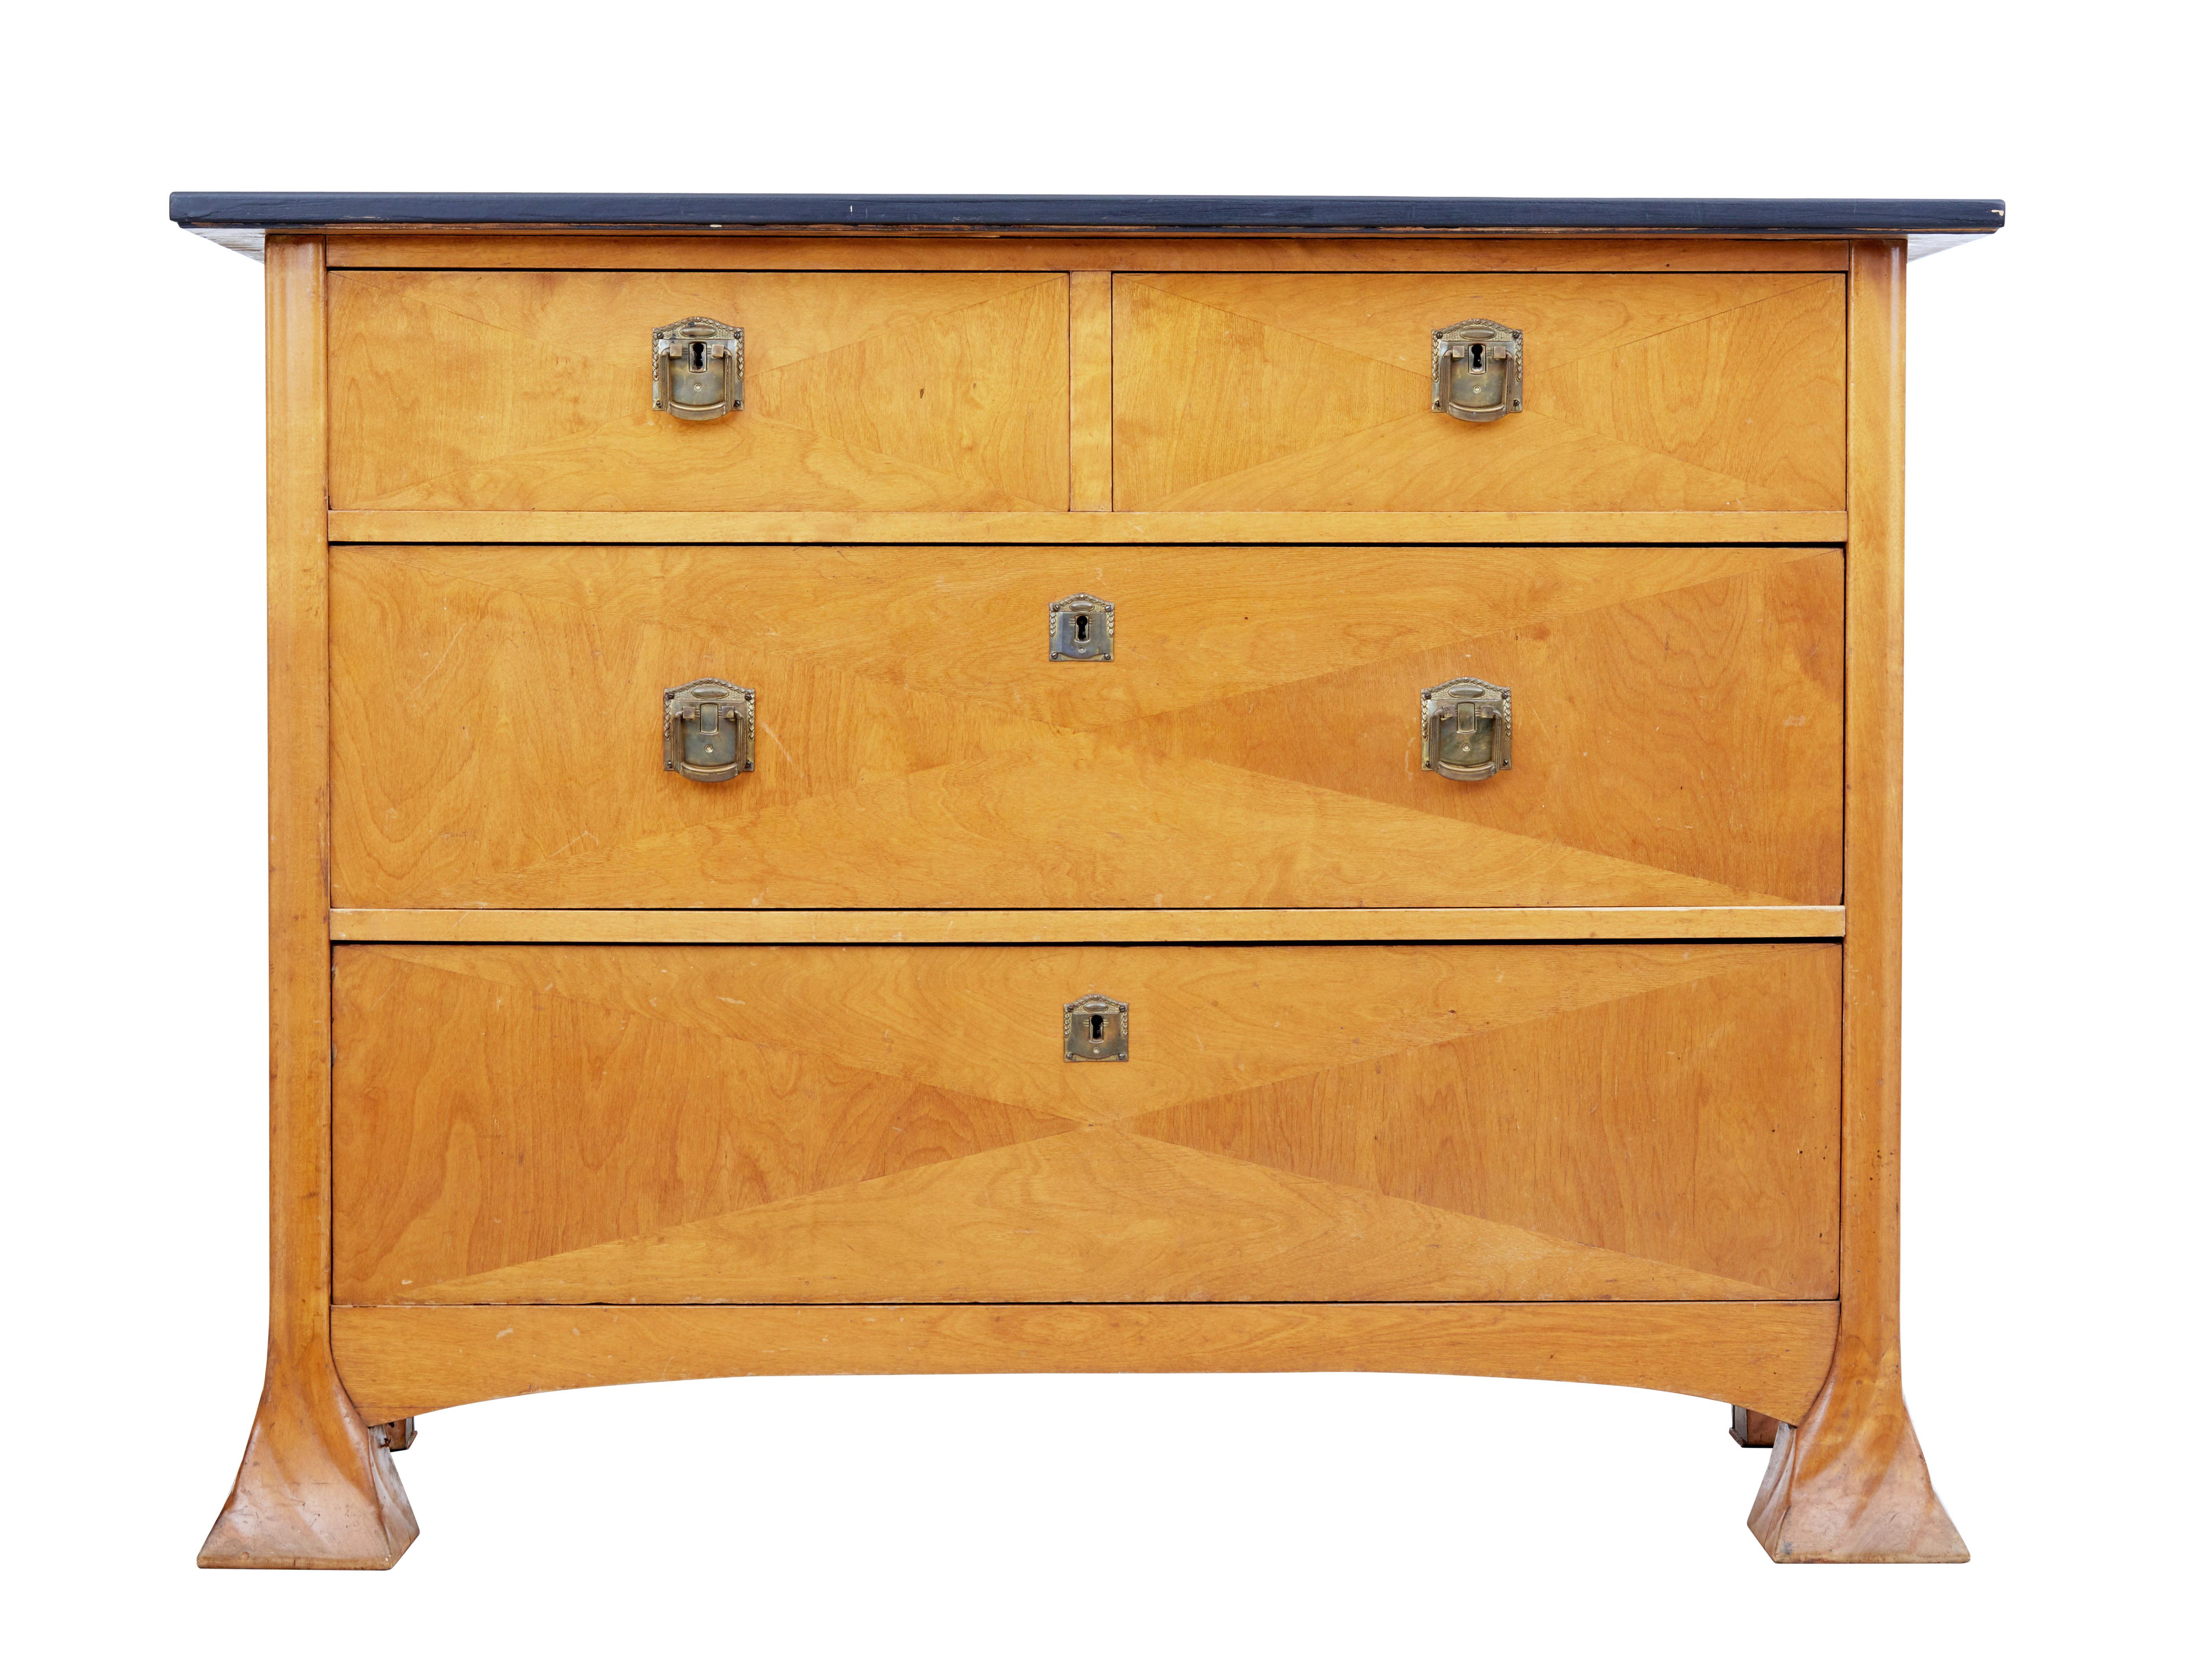 Late 19th century Swedish birch Art Nouveau chest of drawers circa 1890.

Unusual Art Nouveau Swedish chest of drawers.

2 over 2 drawers with original handles and escutheons. Original top which has since been sanded and ebonised. Unusual